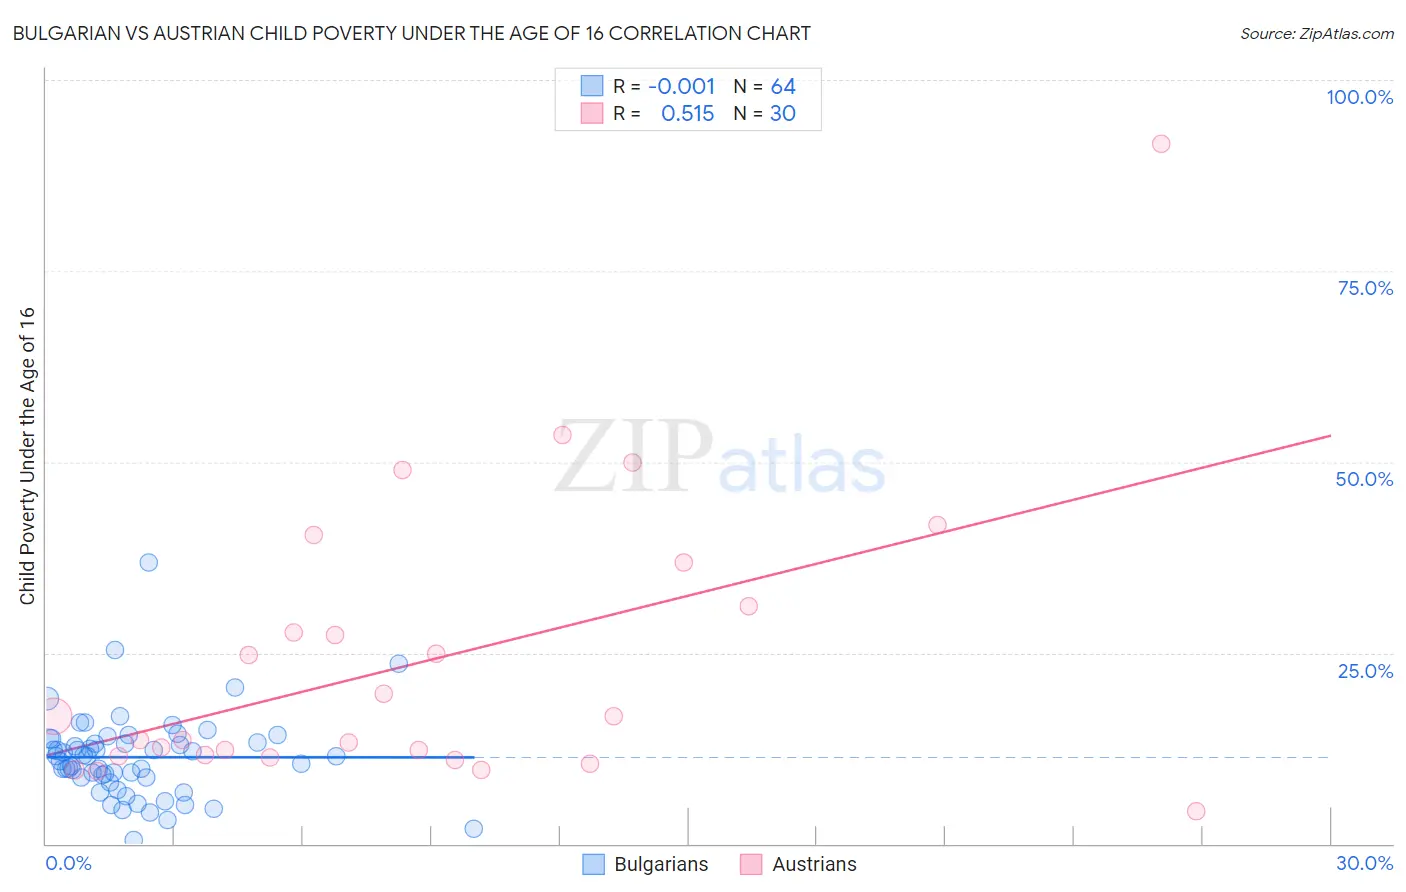 Bulgarian vs Austrian Child Poverty Under the Age of 16